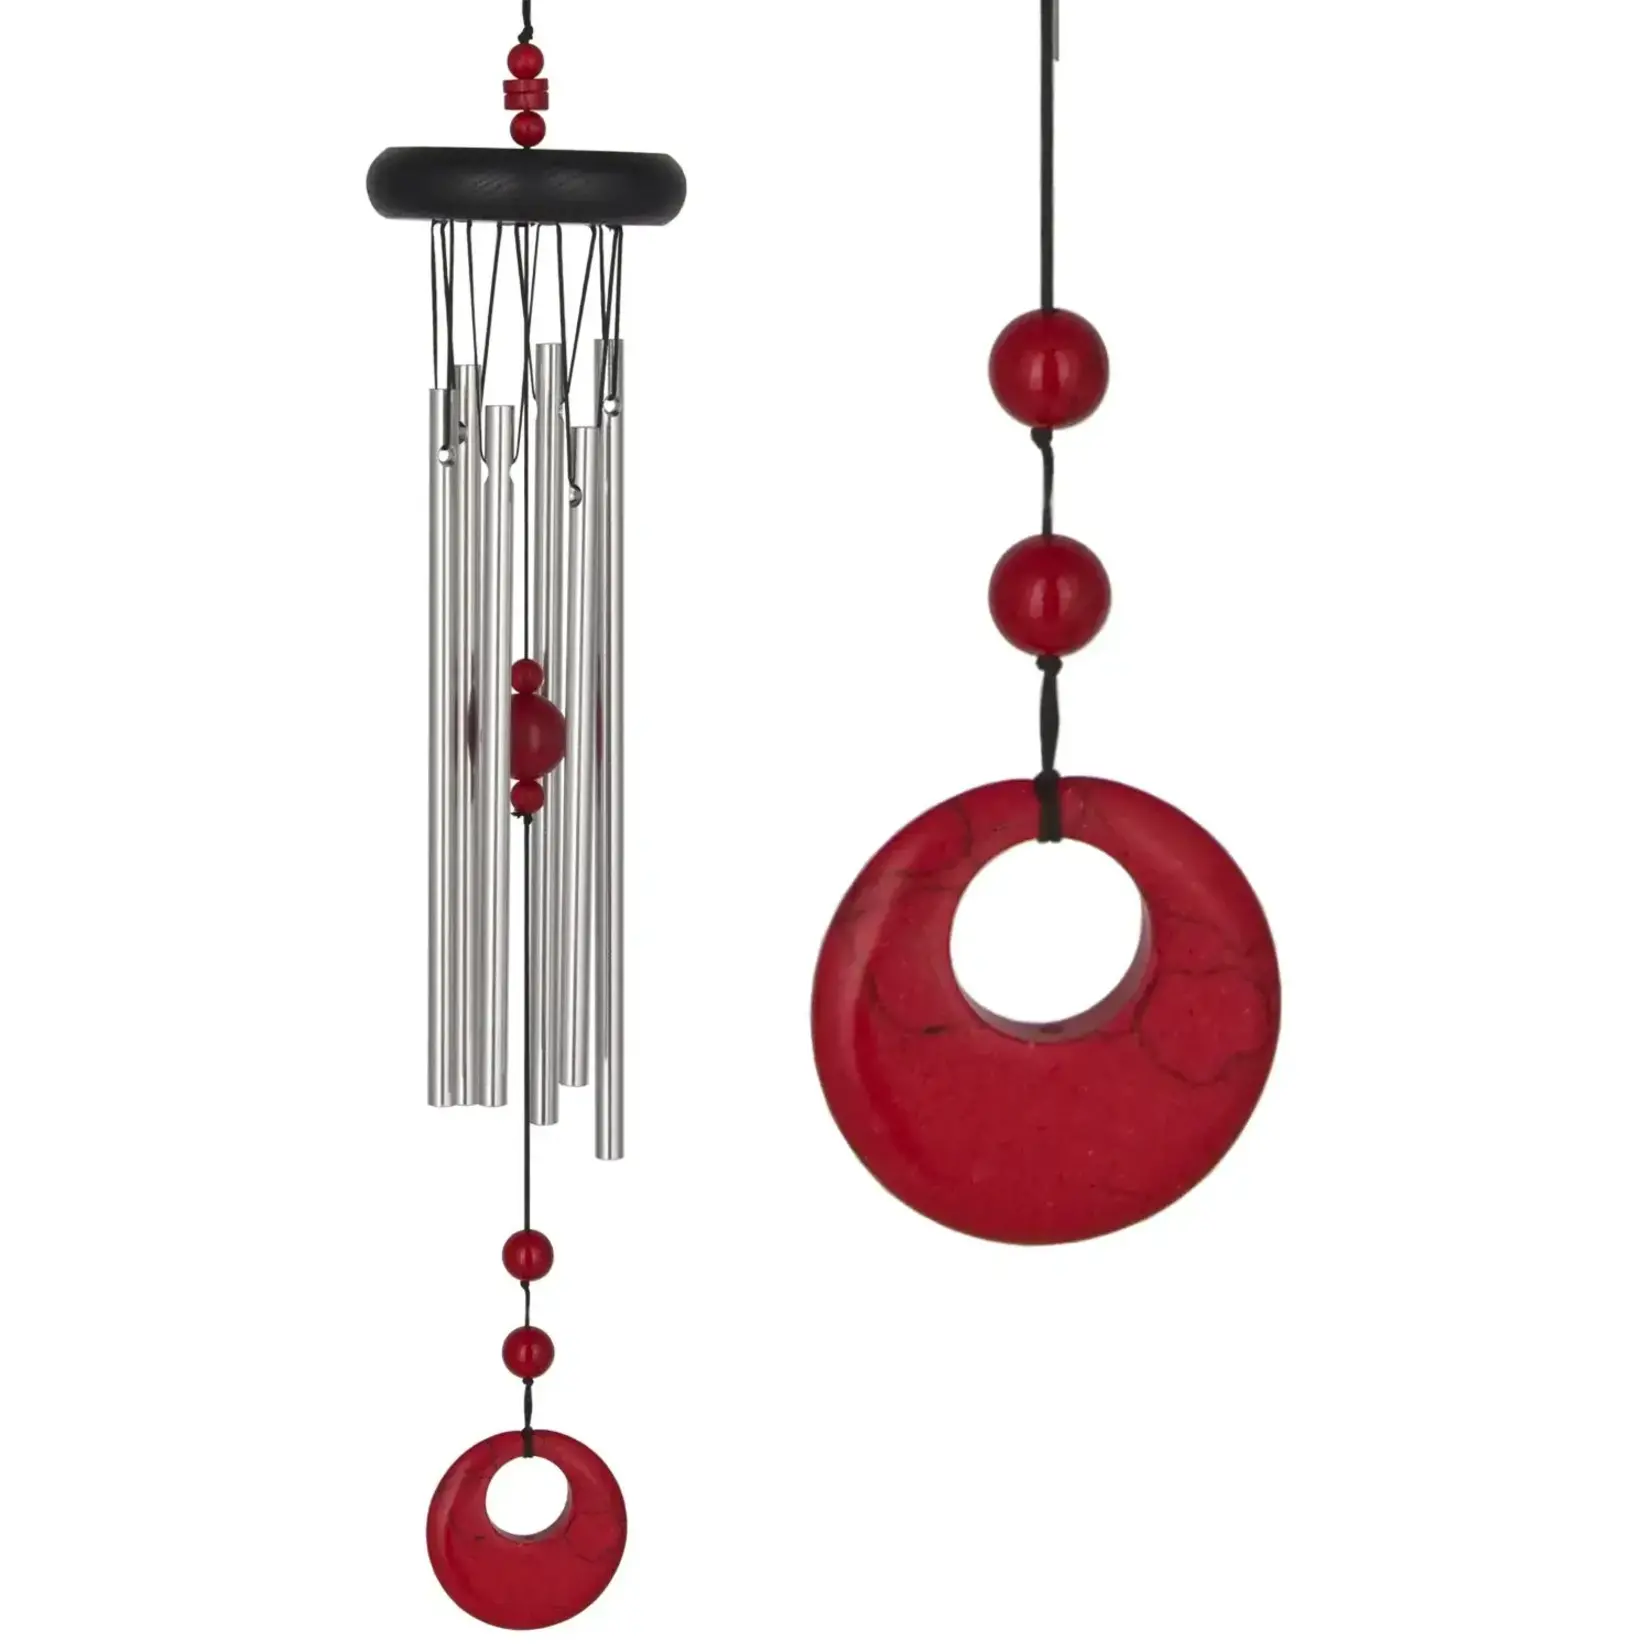 Woodstock Chimes Chakra Chime Red